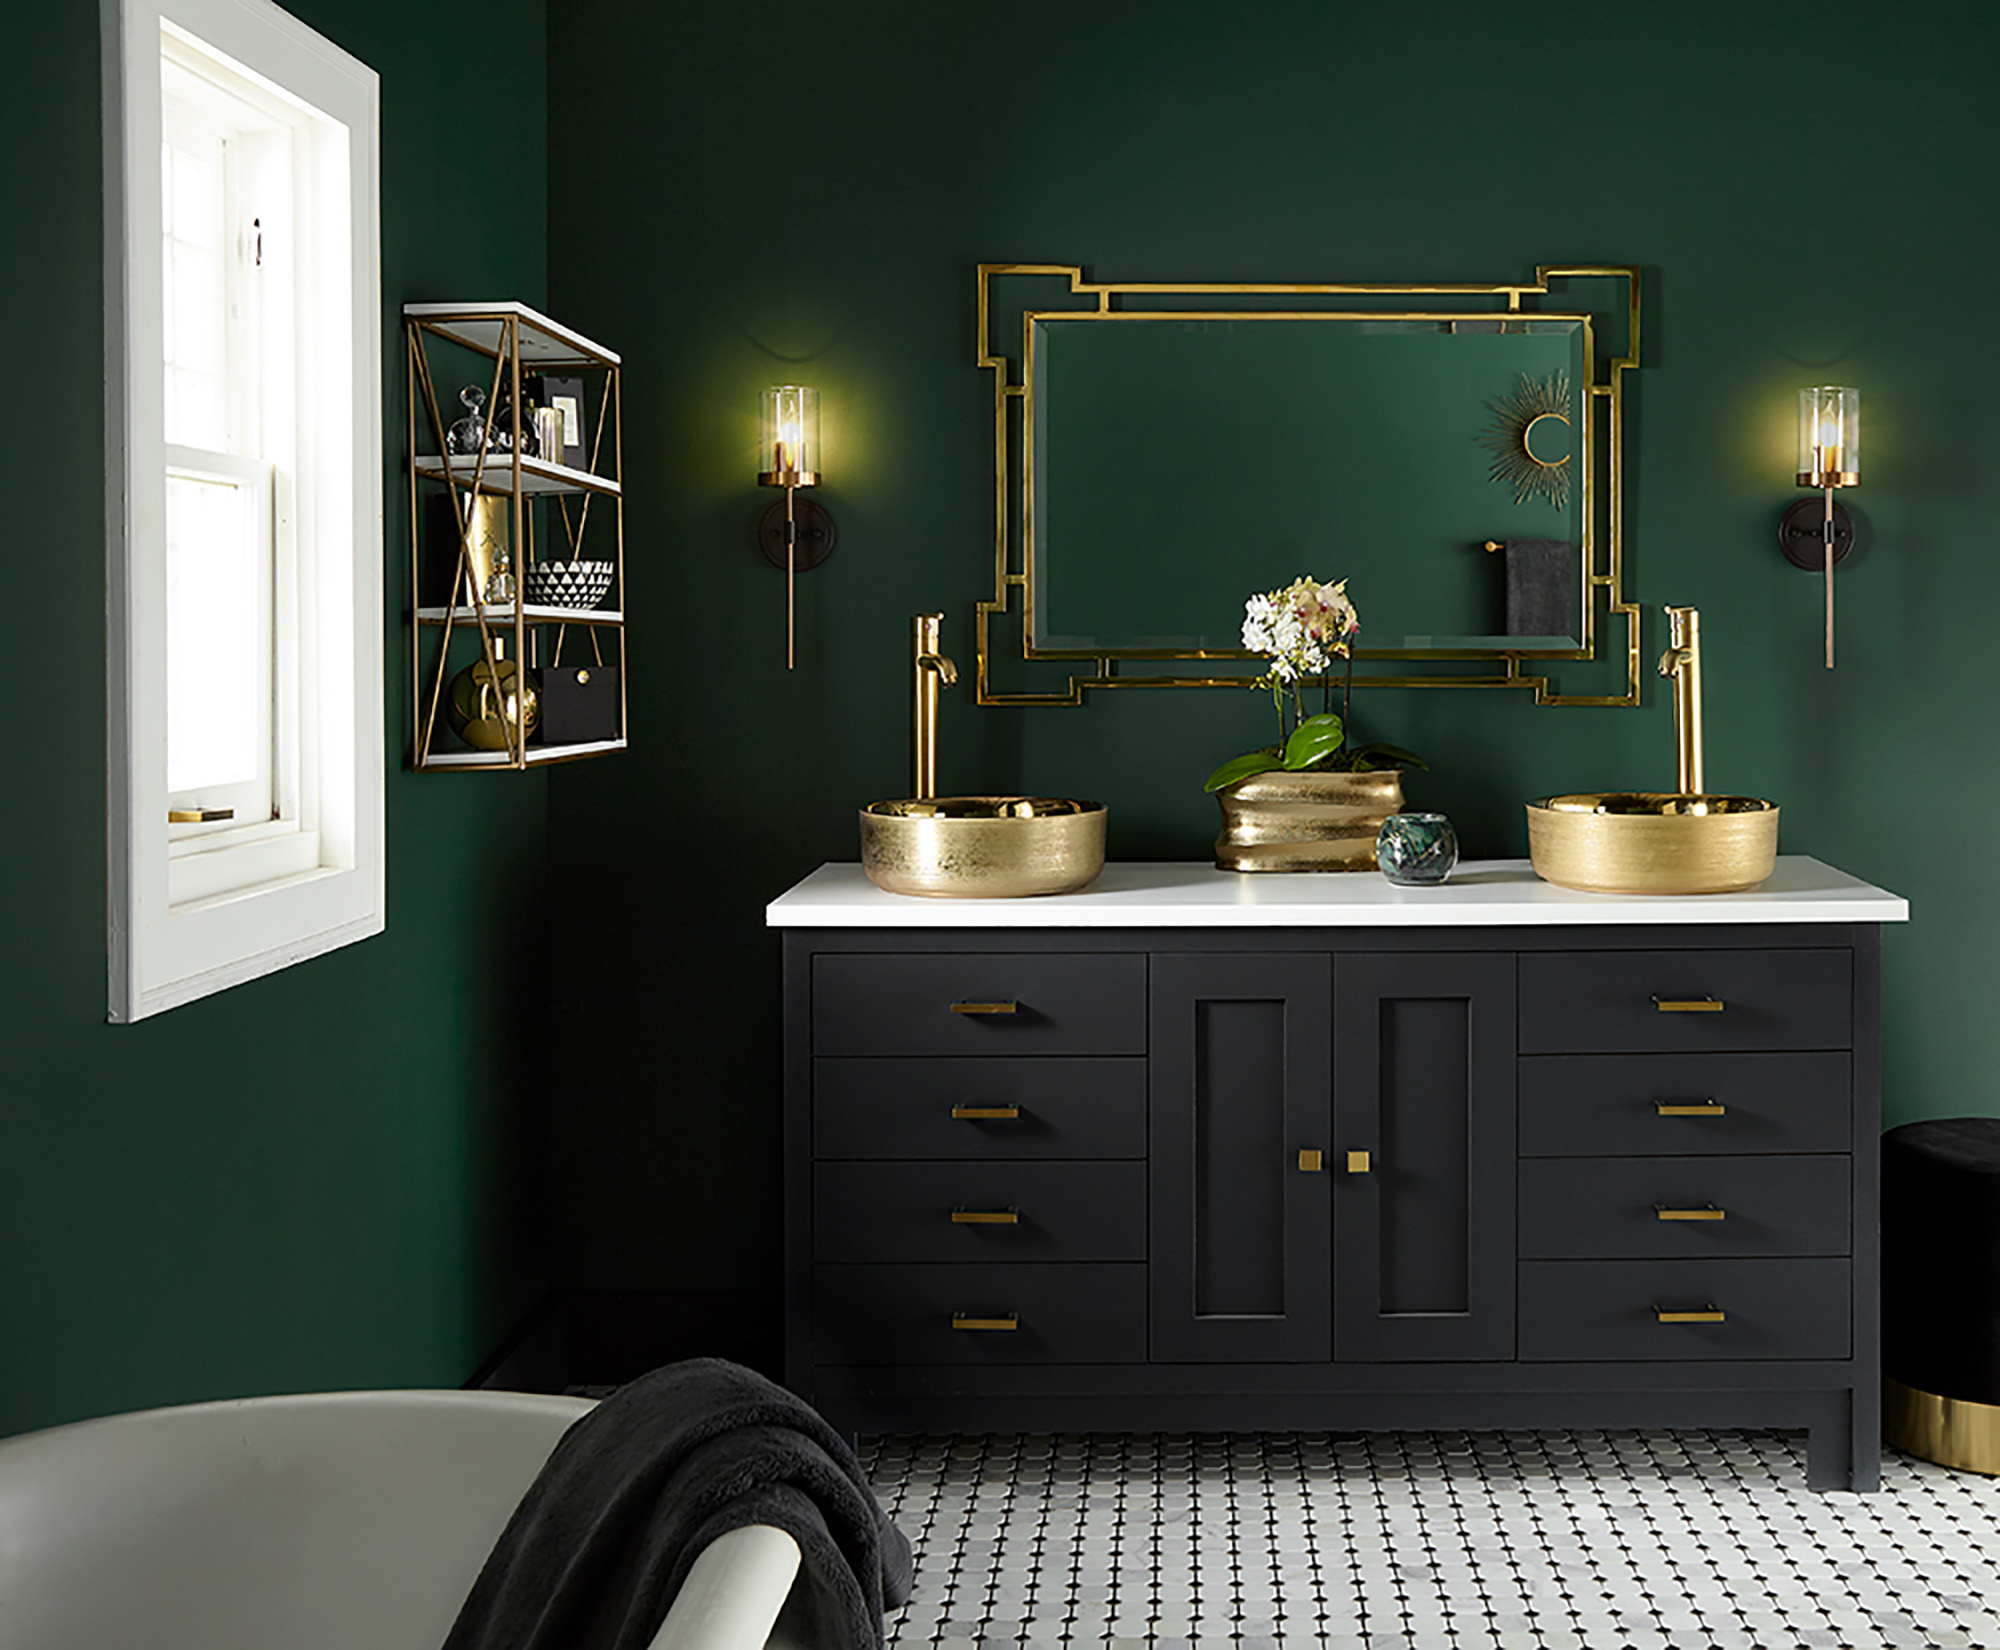 10 Beautiful Bathroom Paint Colors for your next Renovation